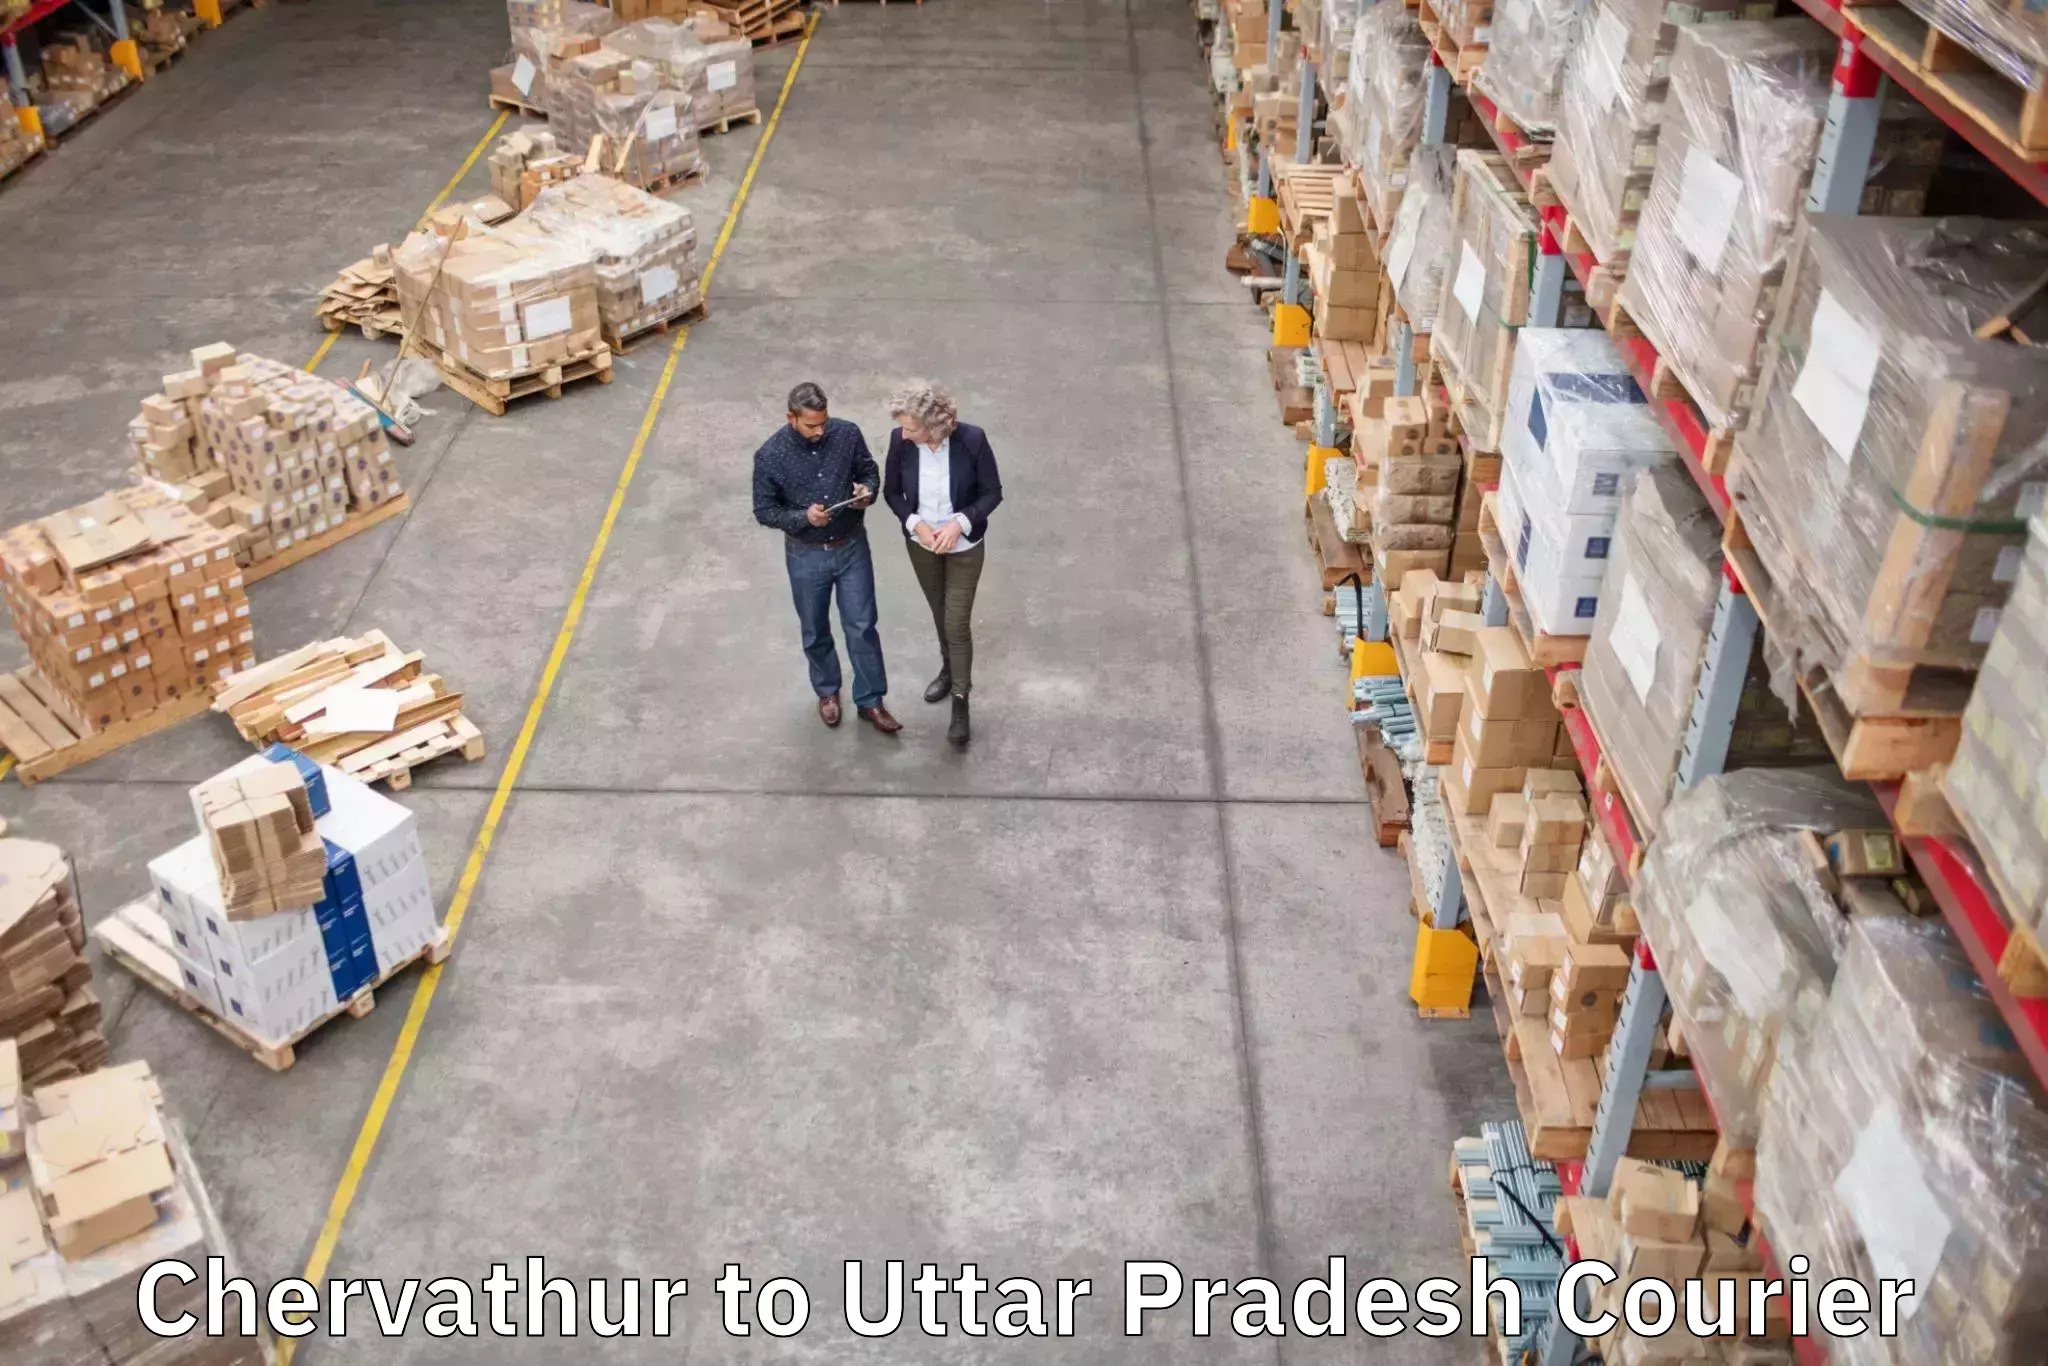 Luggage shipment specialists Chervathur to Aligarh